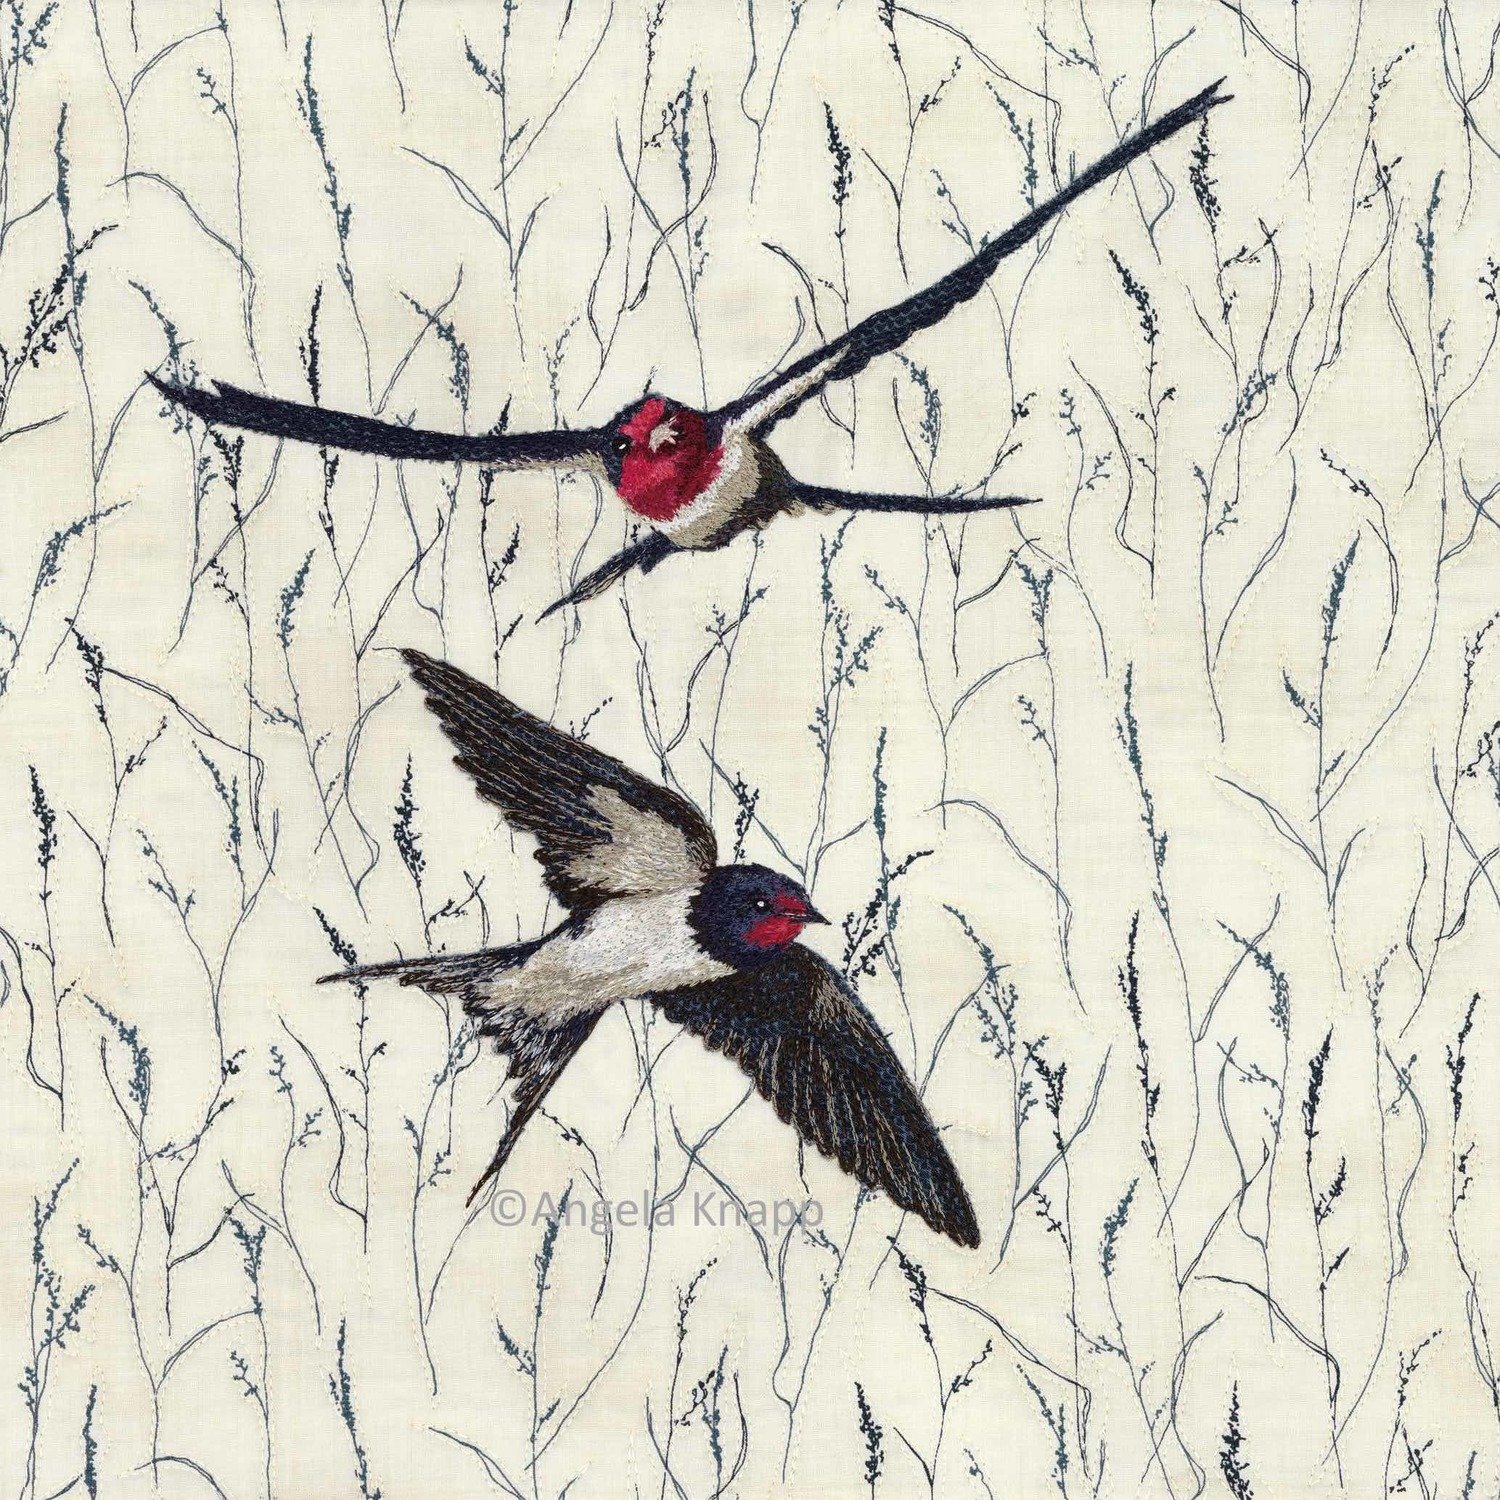 'Rush Hour' Swallows - Limited Edition Giclee Print